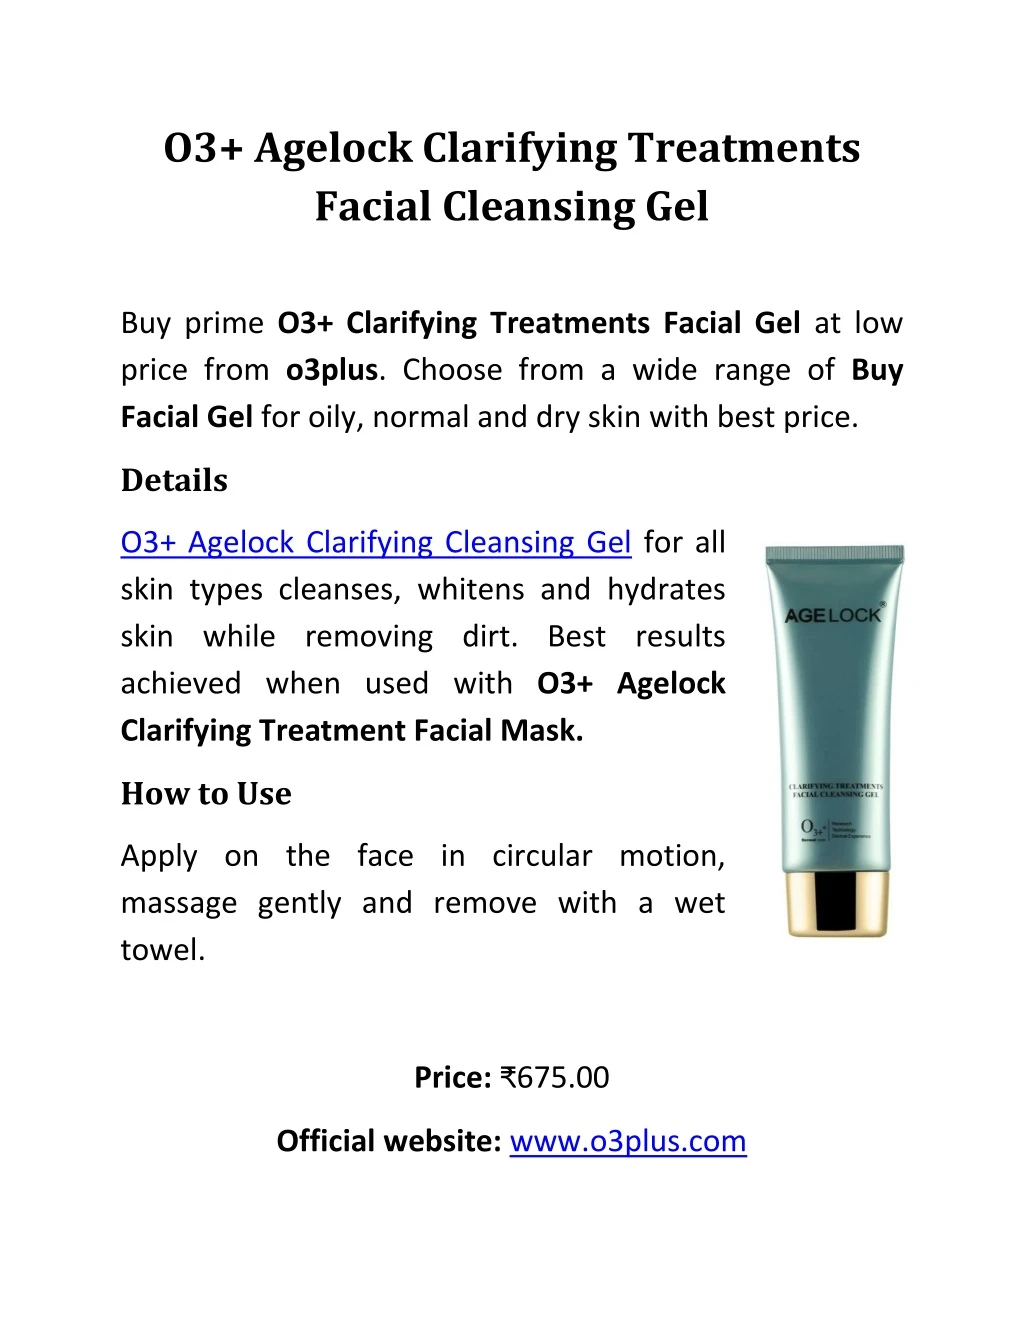 o3 agelock clarifying treatments facial cleansing